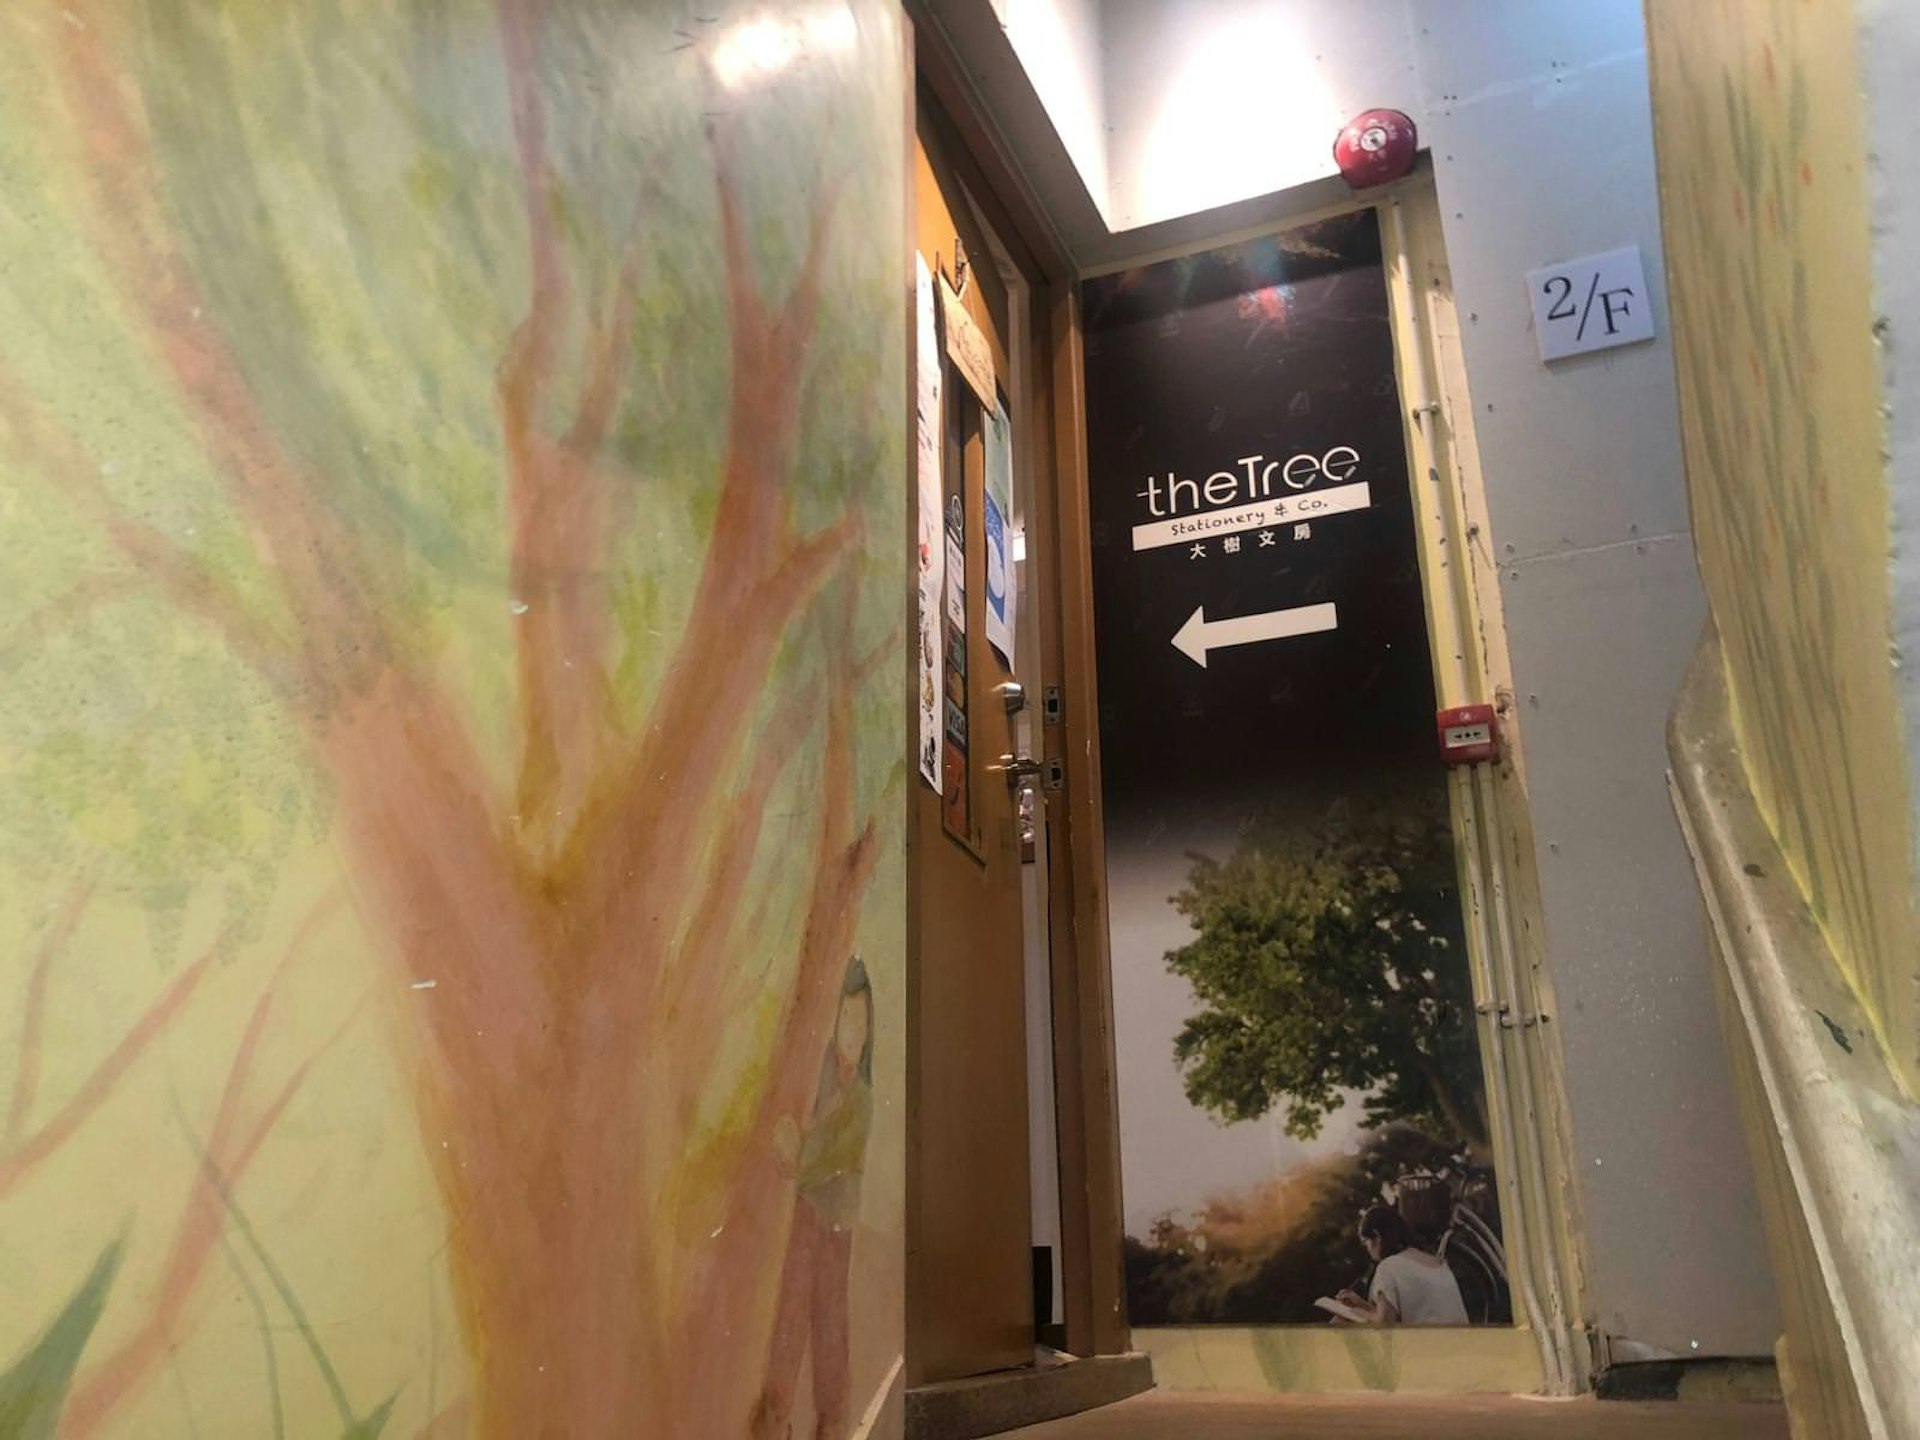 A stairwell with a mural of a tree and the Tree Stationery sign denoting entrance to the shop